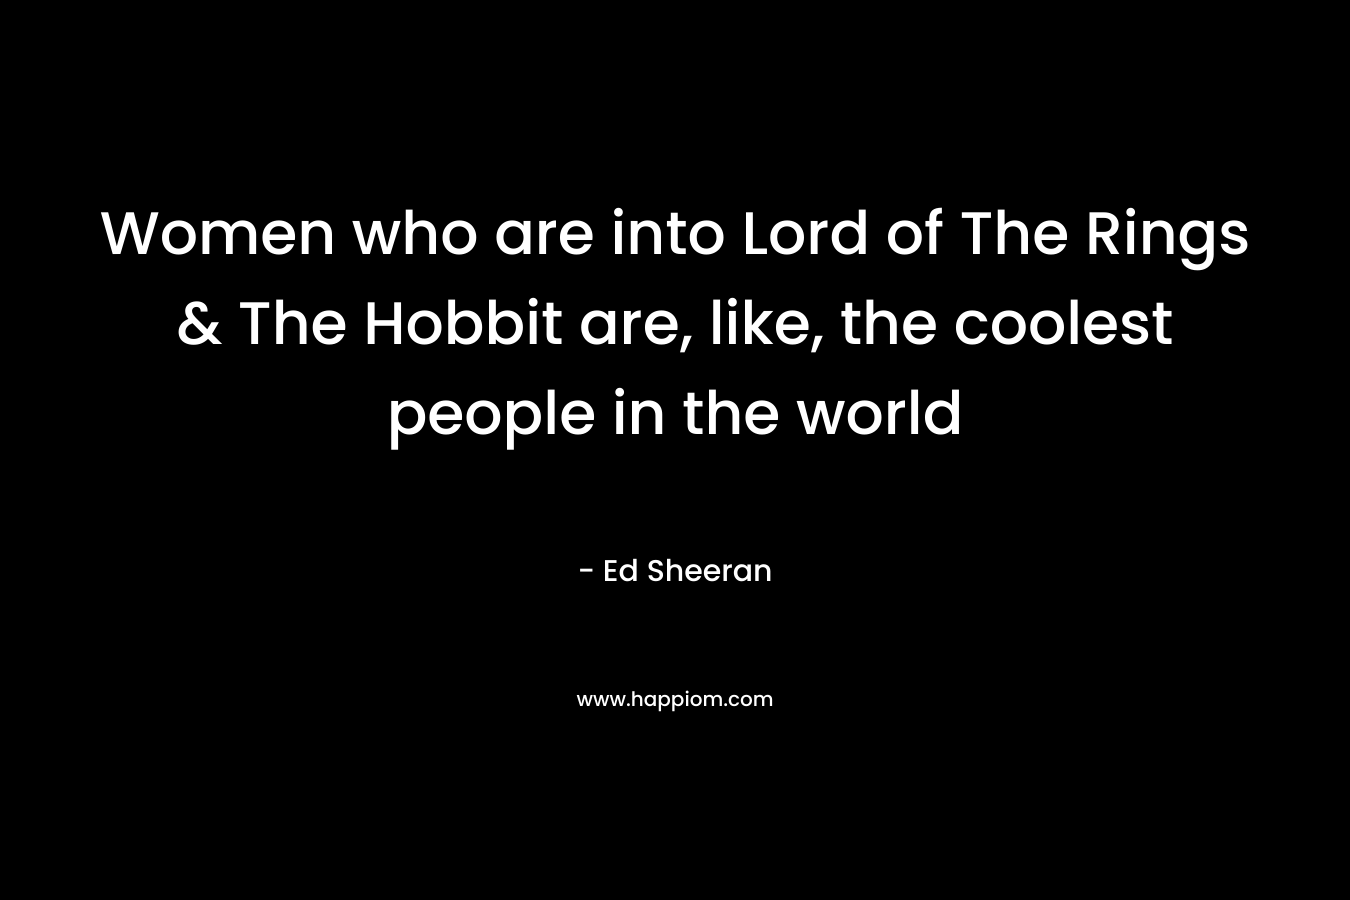 Women who are into Lord of The Rings & The Hobbit are, like, the coolest people in the world – Ed Sheeran